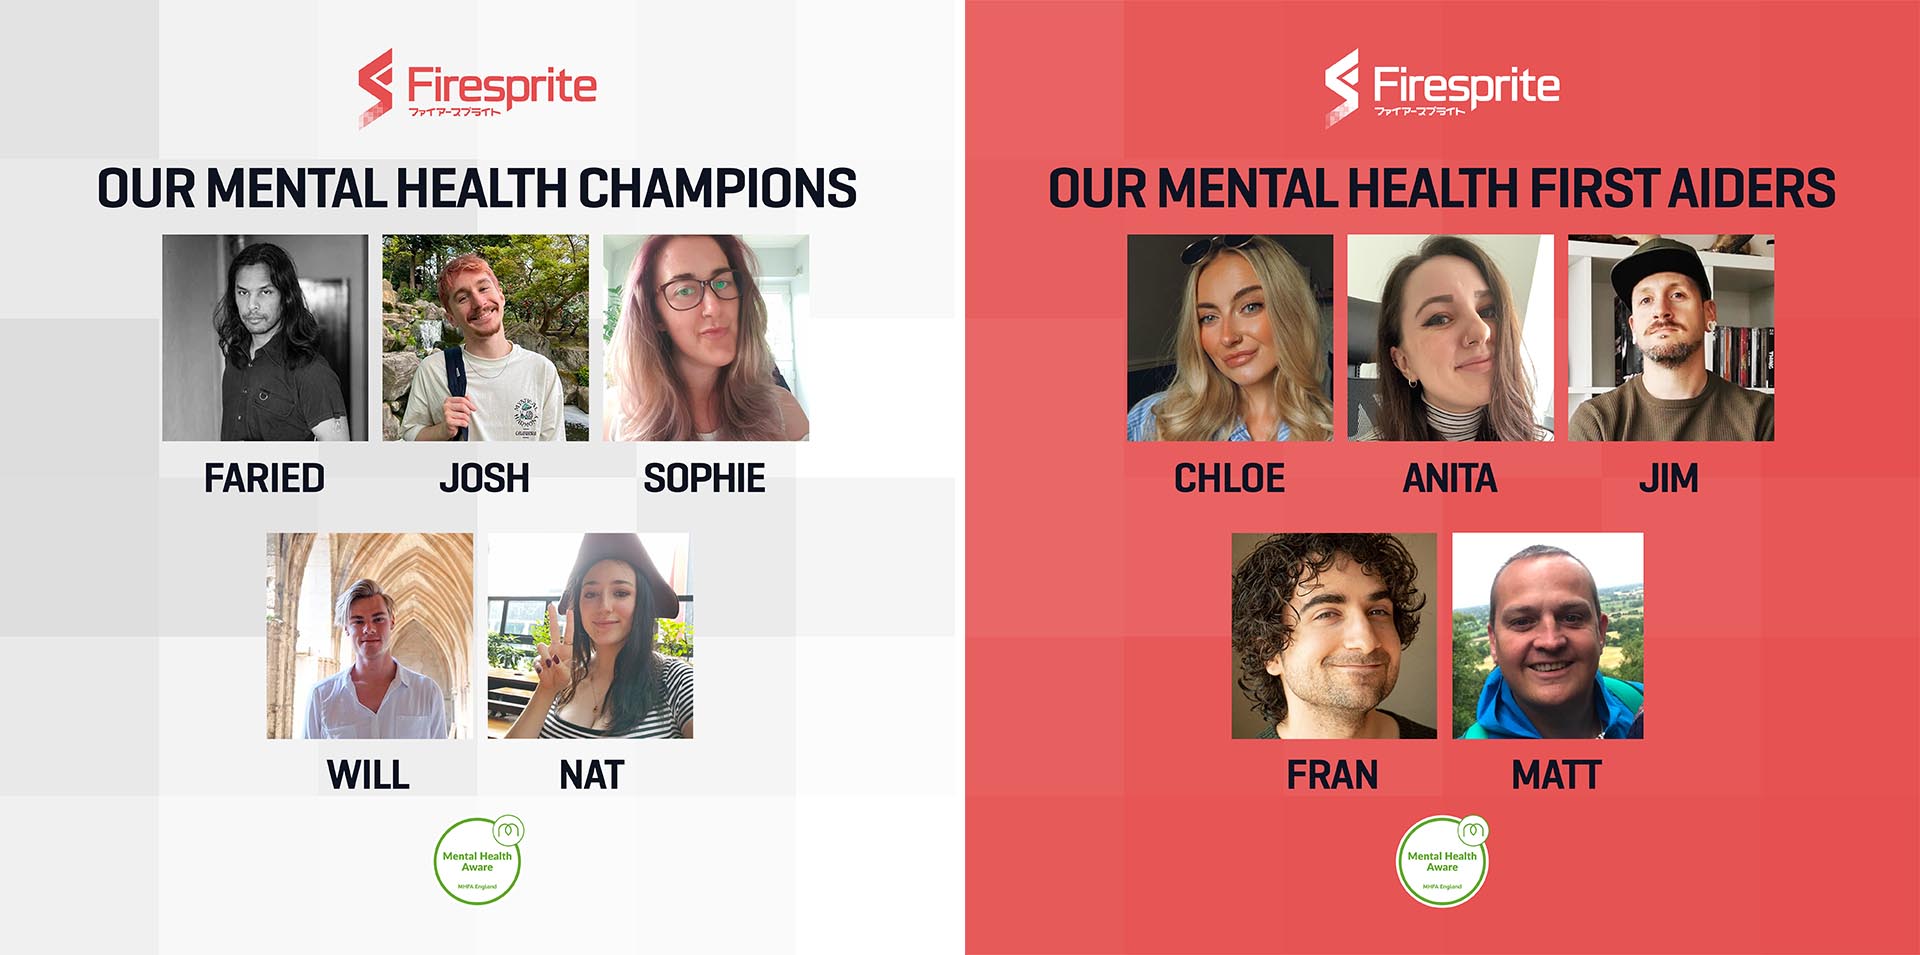 The Firesprite Mental Health Champions and Mental Health First Aiders